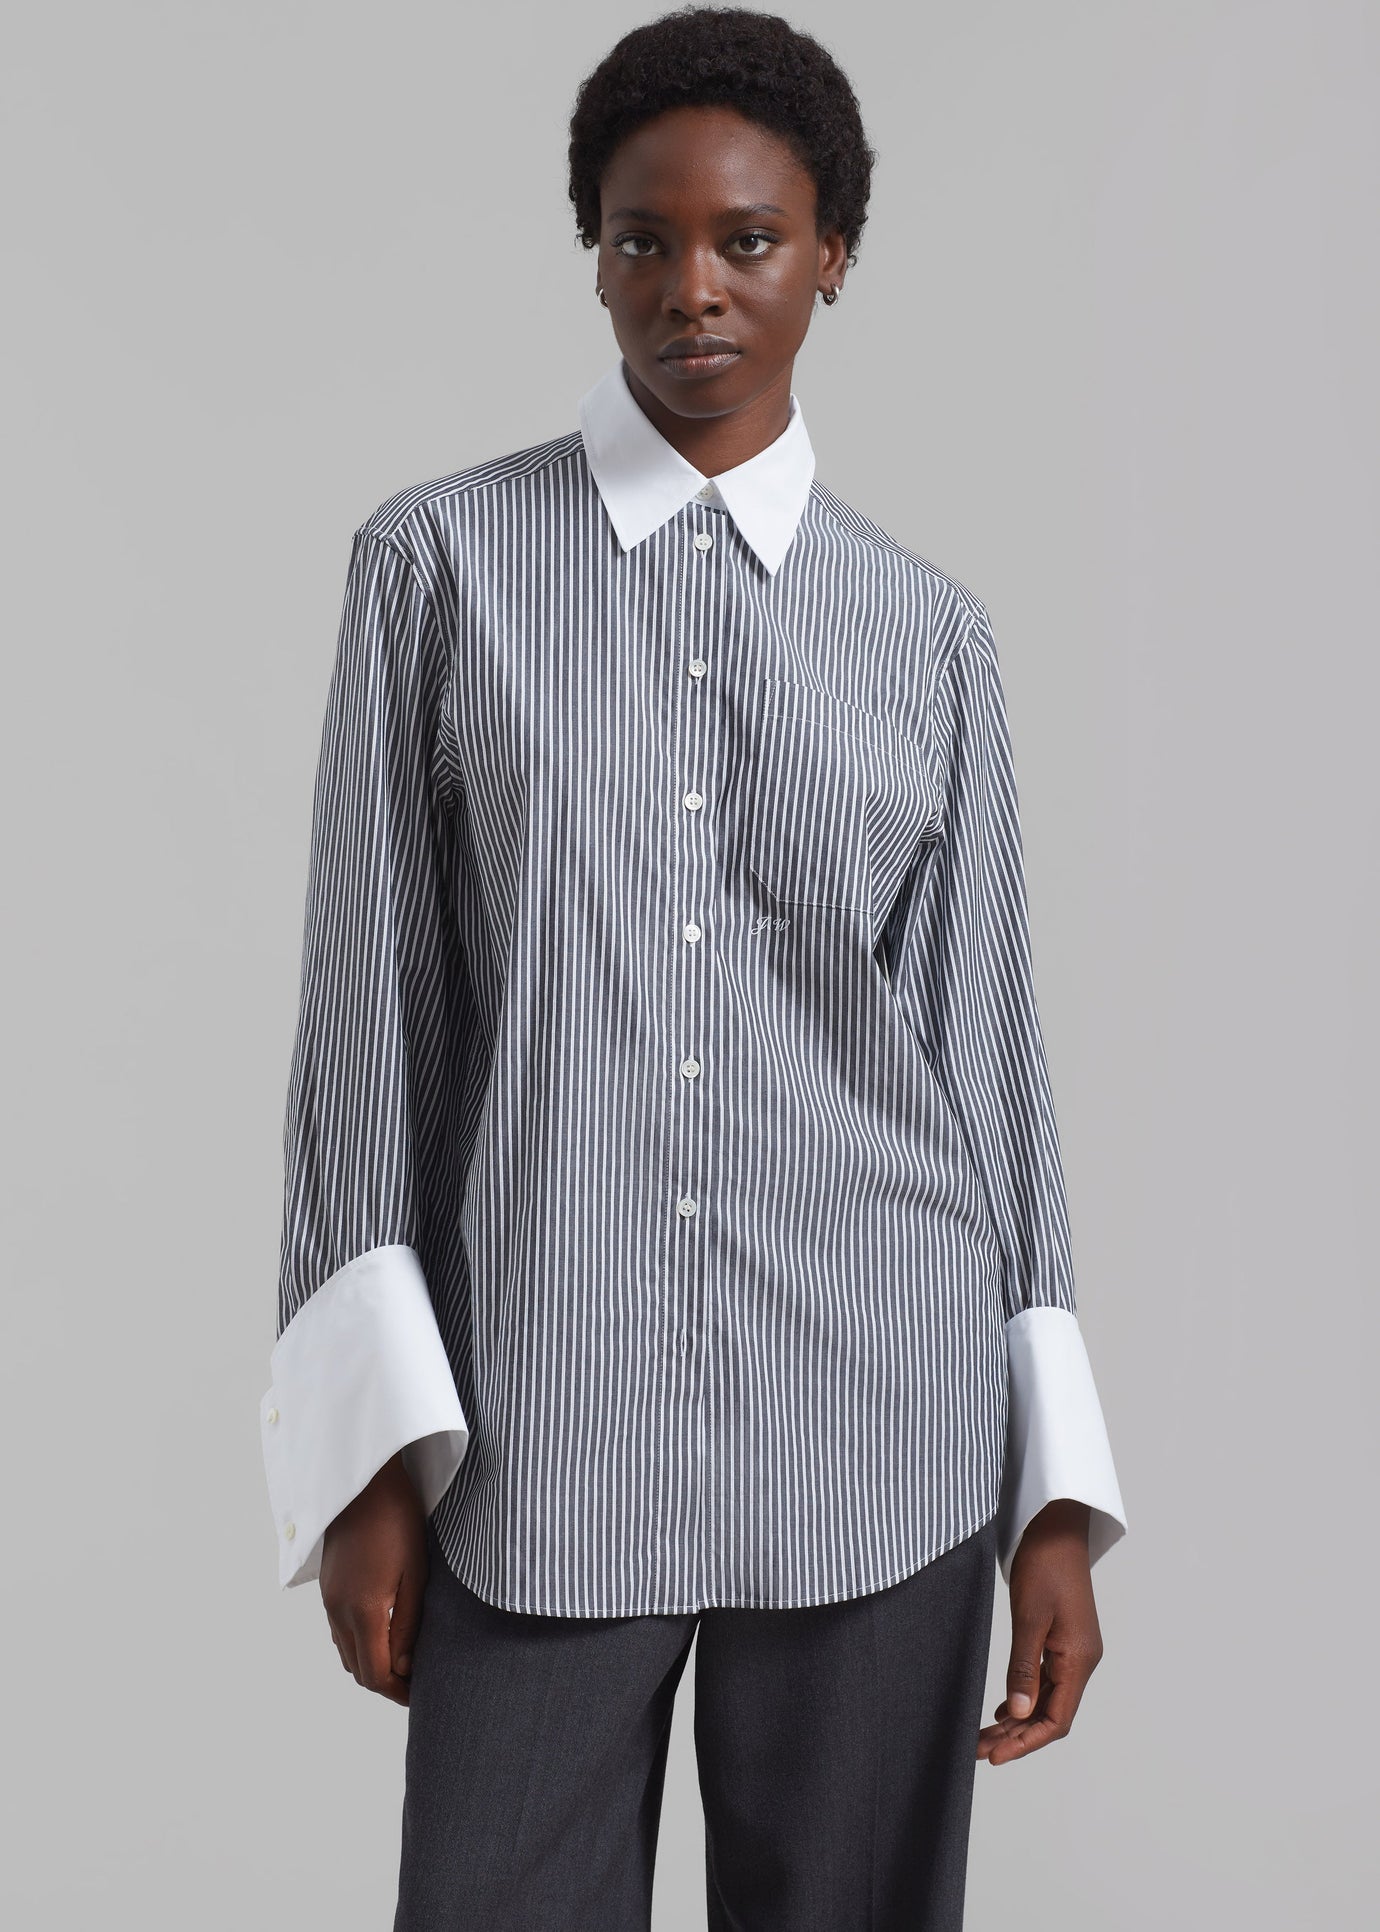 JW Anderson Oversized Cuff Shirt - Charcoal/White - 1